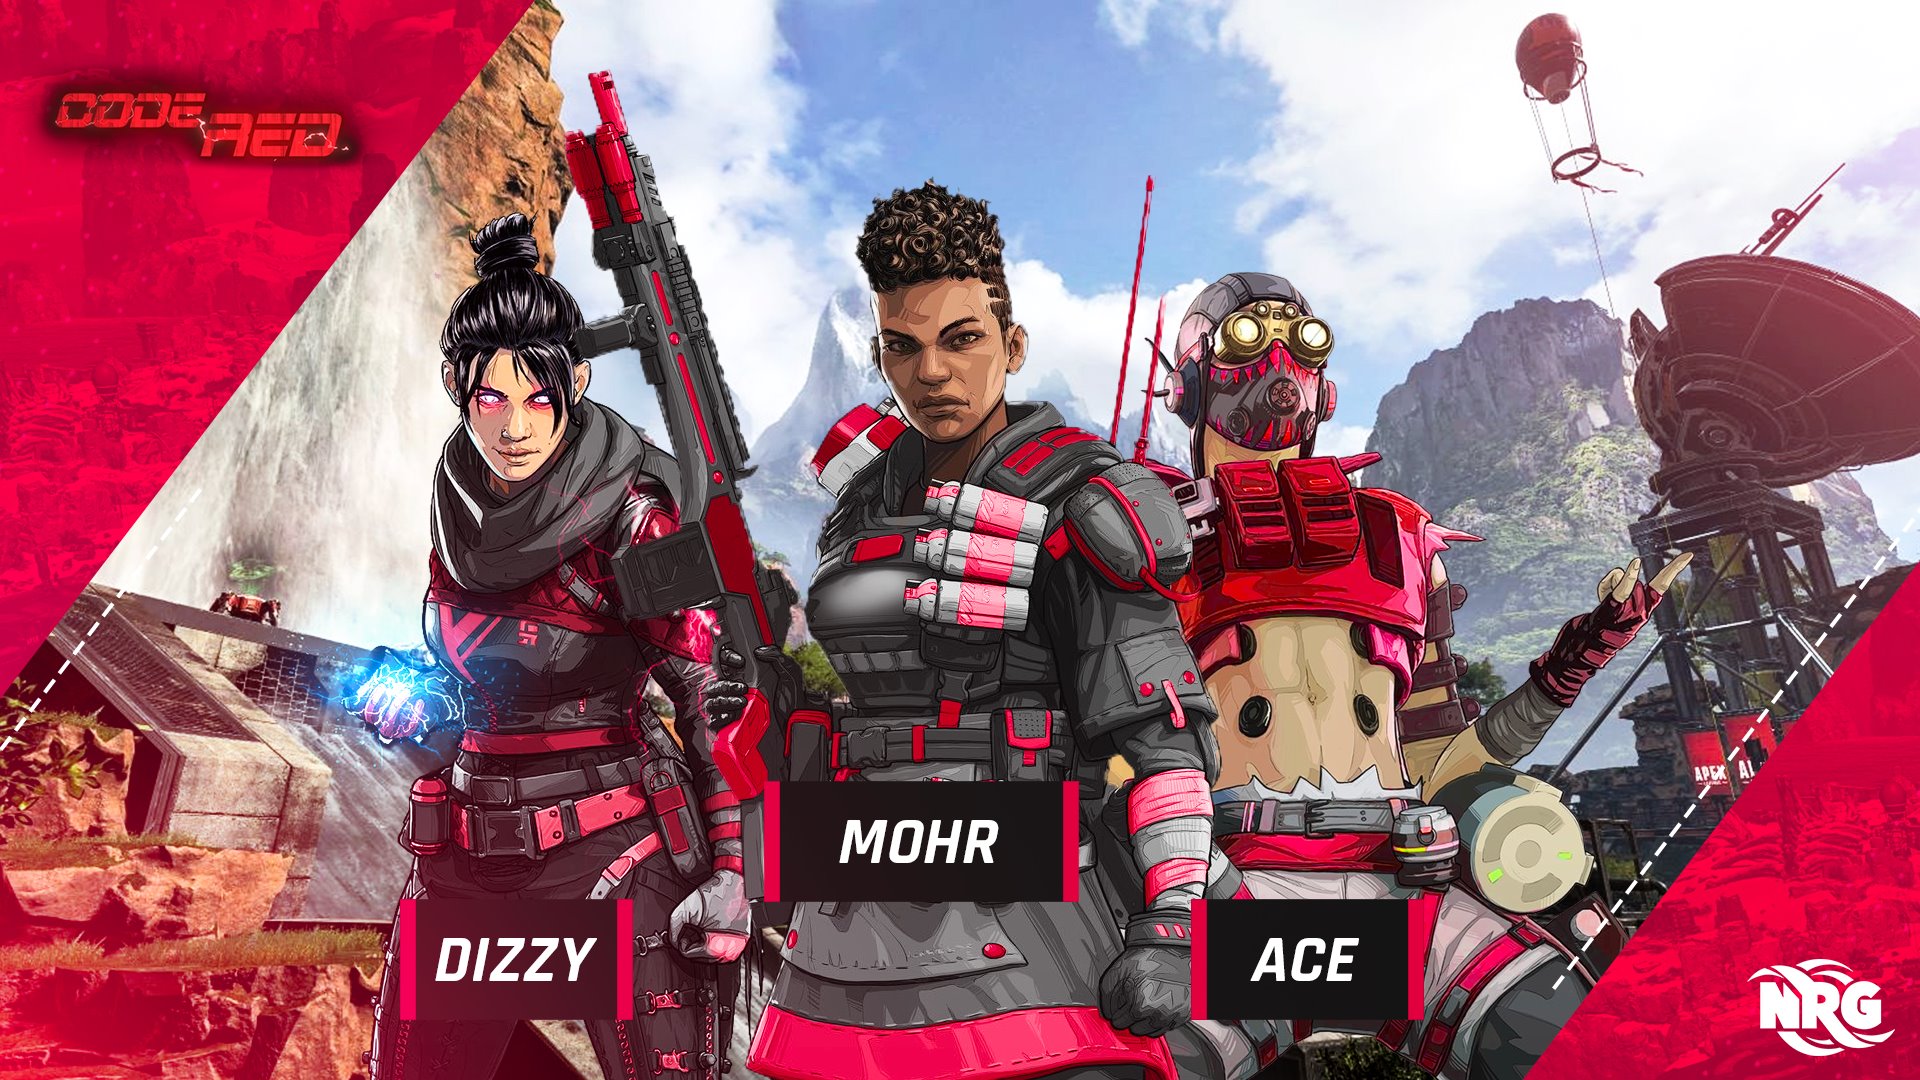 Nrg The Nrg Apex Squad Is Live Playing In Codered Apex Tournament You Know Where They Ending Up Itsmohr Dizzy Letmeace T Co T4vl0hhh1b